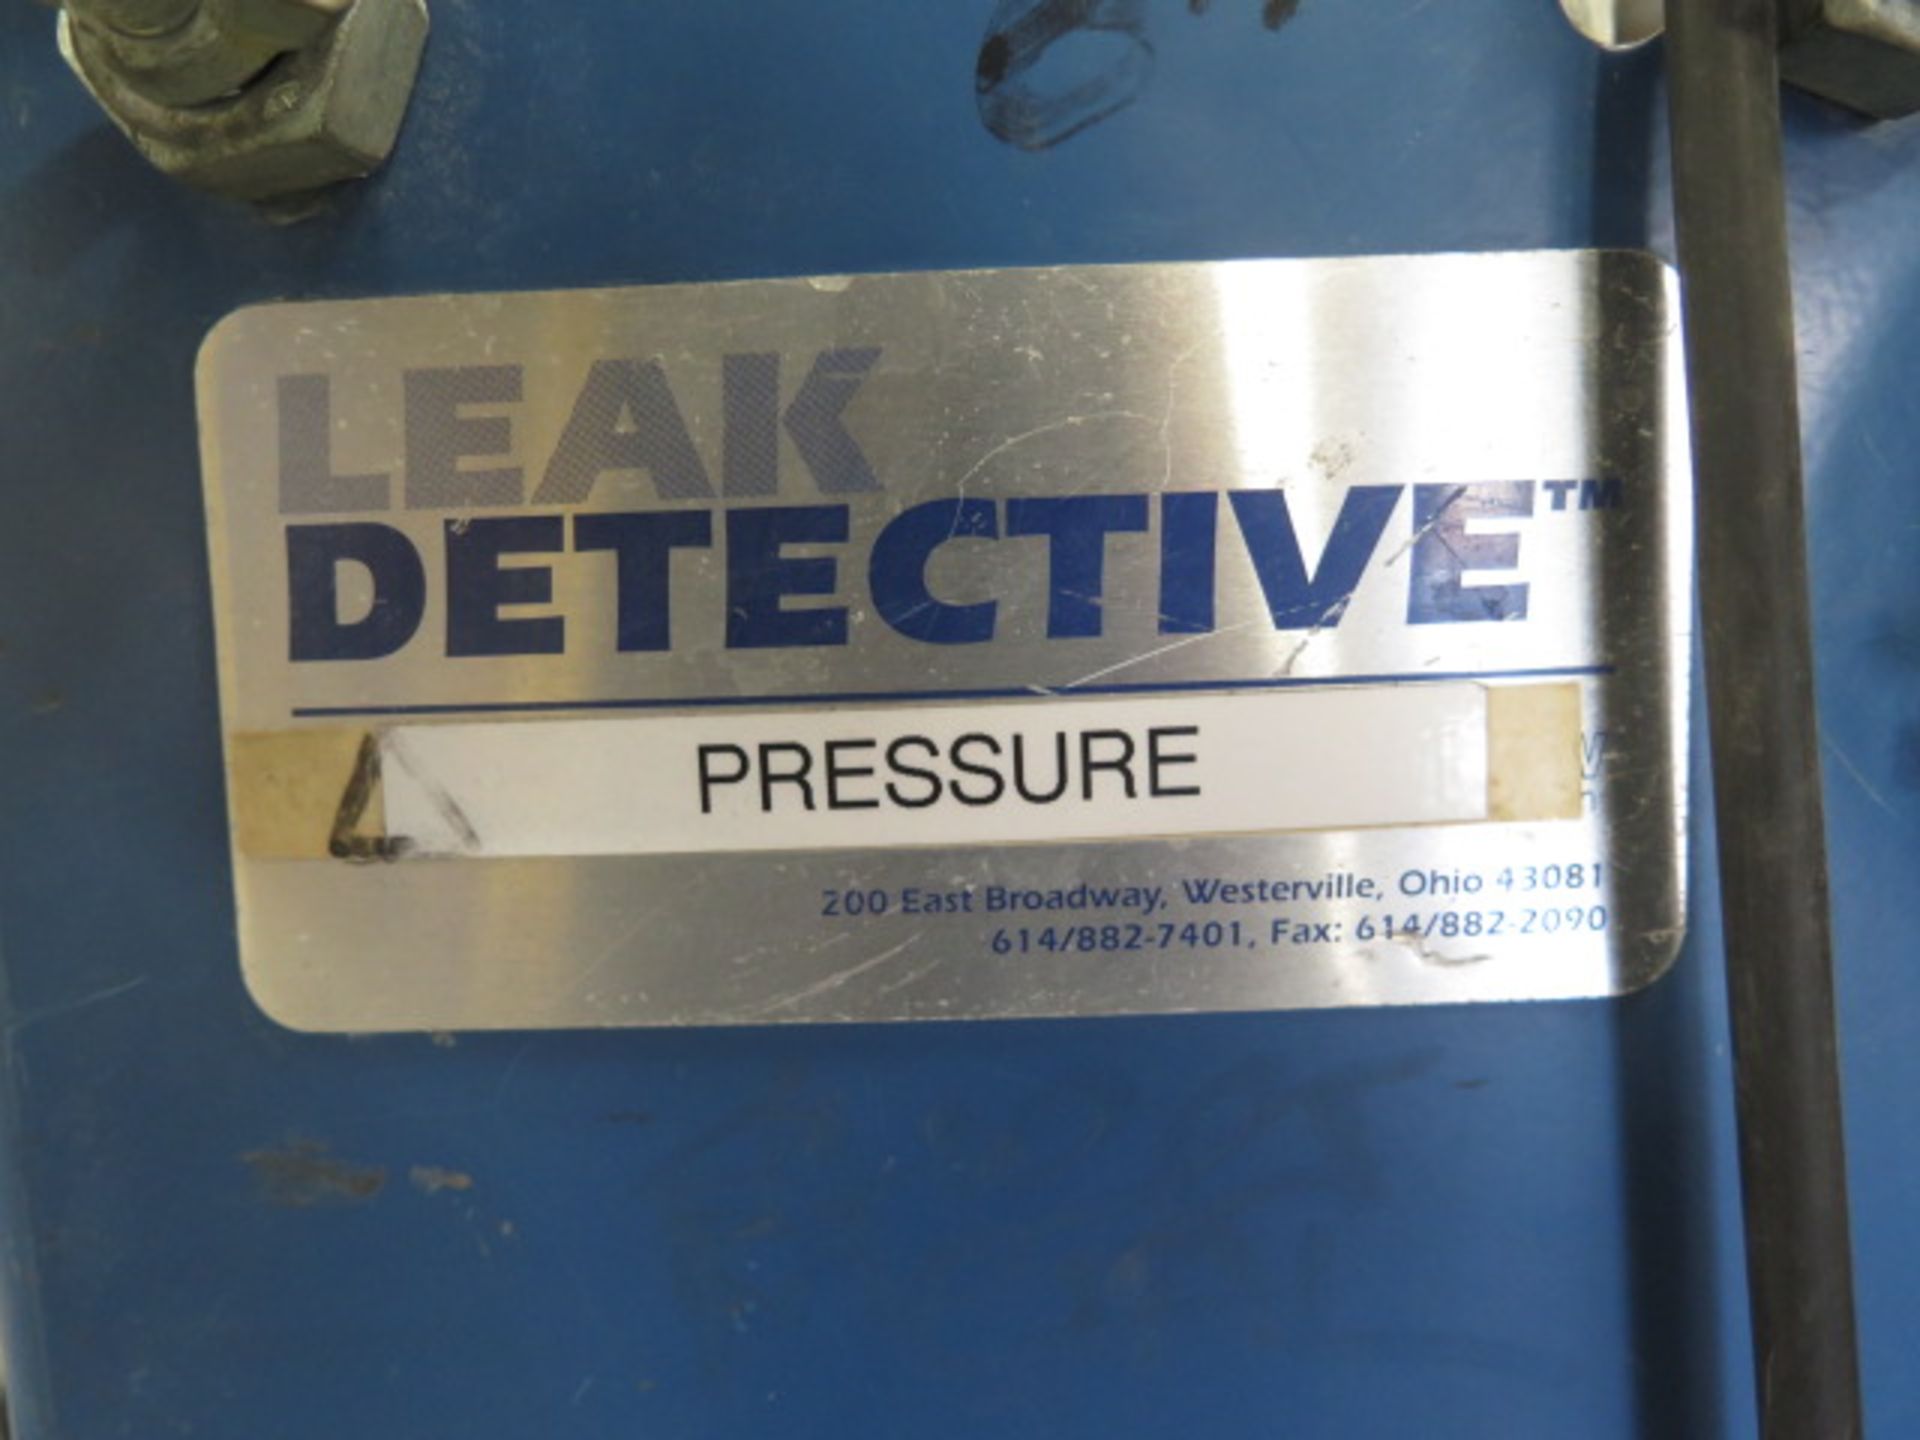 McGill "Leak Detective" Duct Air Leak Tester (SOLD AS-IS - NO WARRANTY) - Image 6 of 6